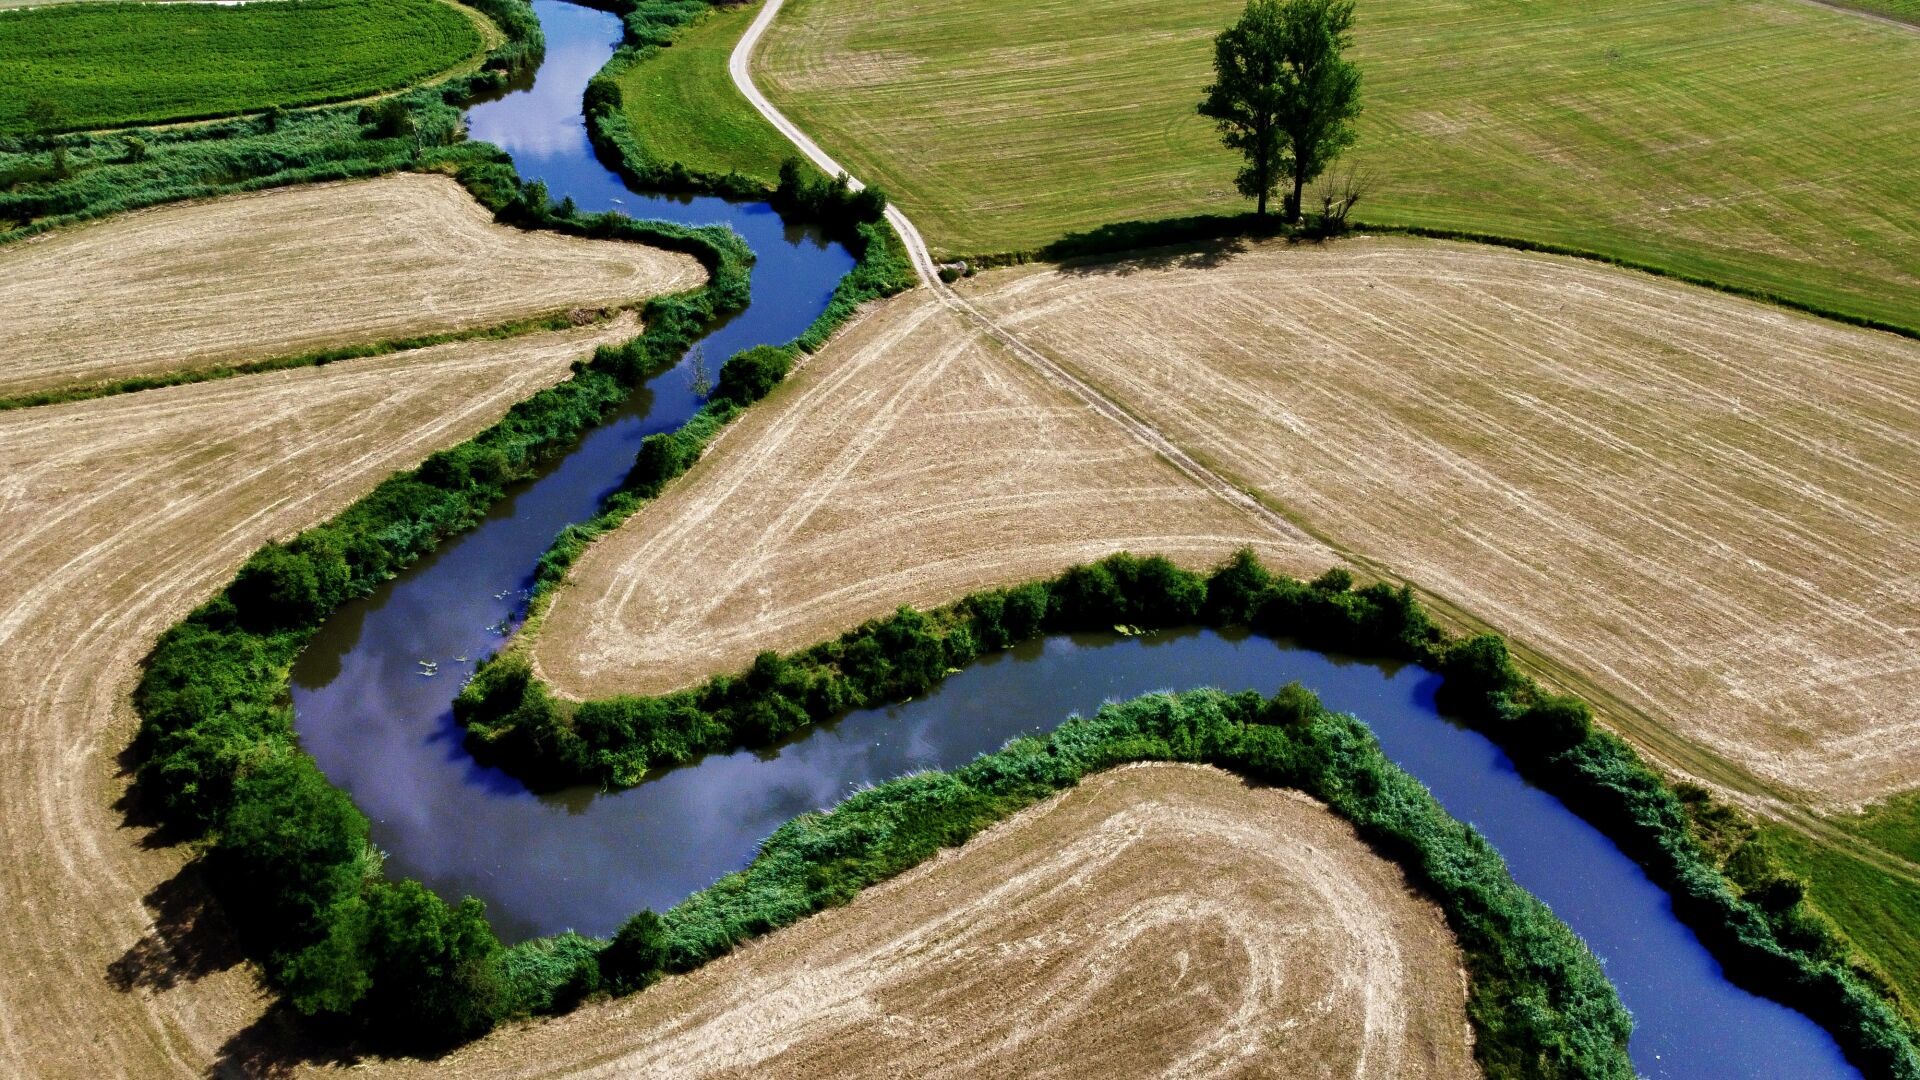 Meander of the Woernitz River

#landscapephotography #dronephotography #bayern #donauries #photography